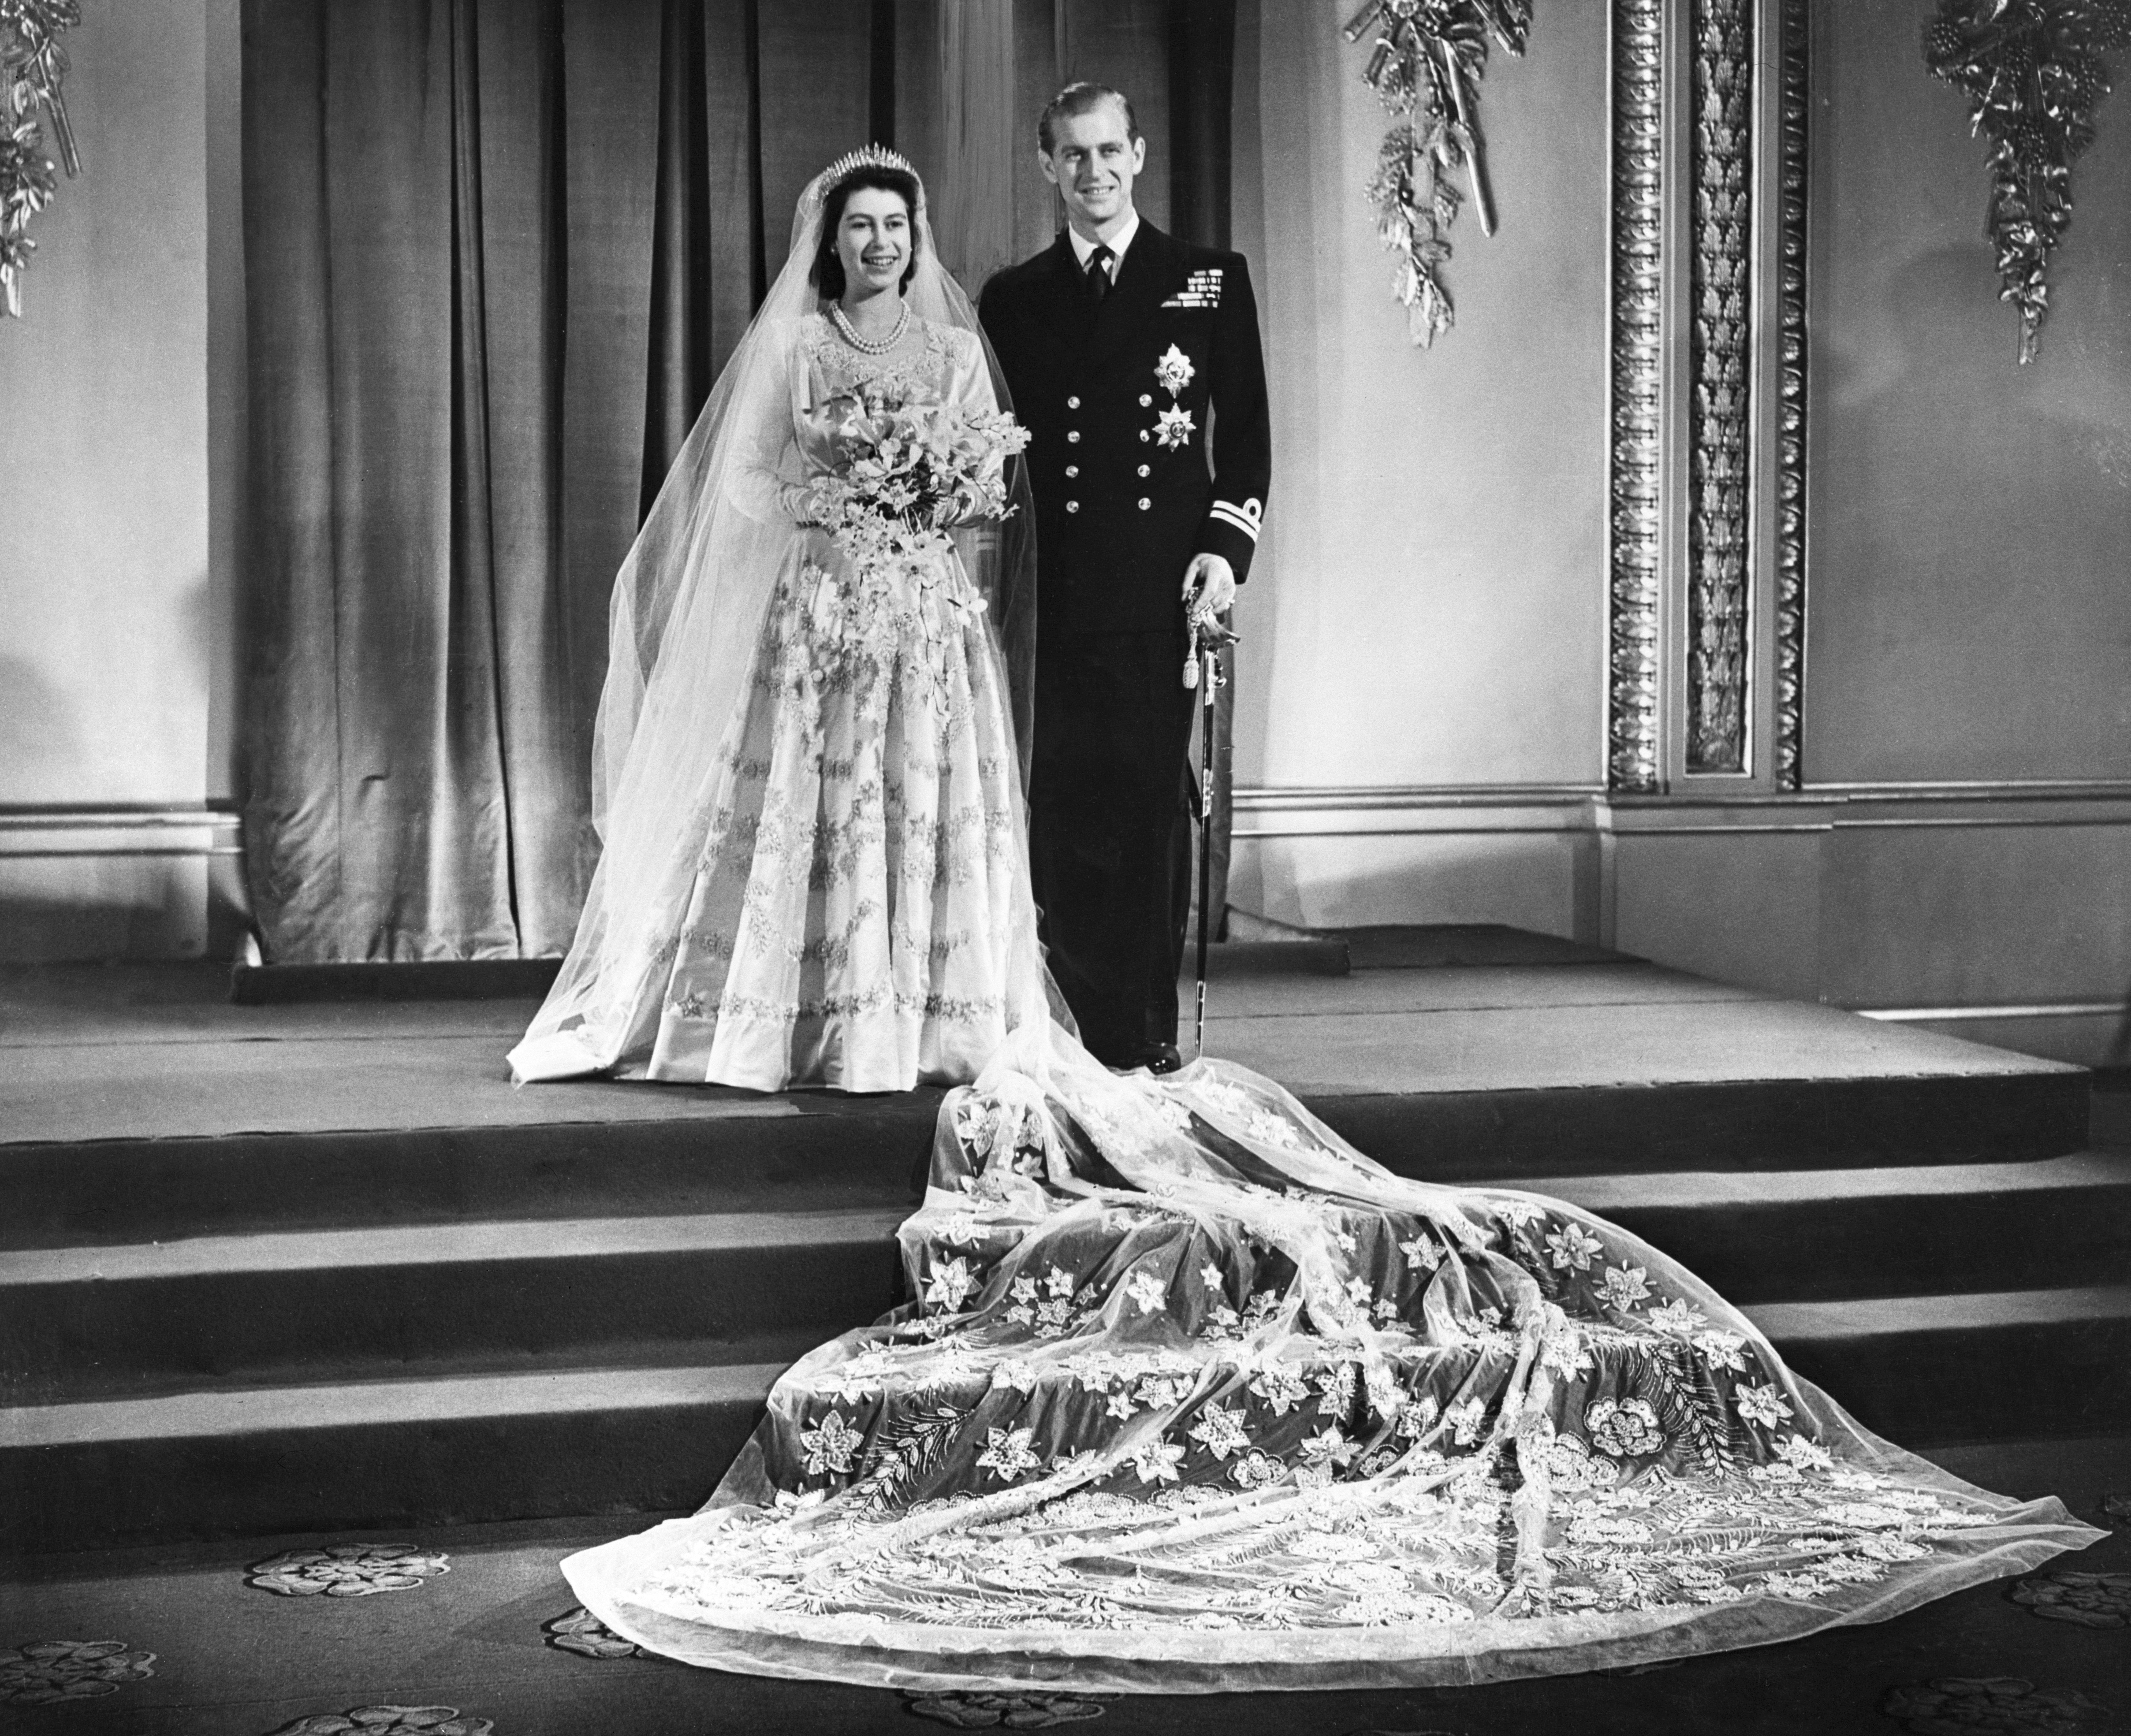 Princess Elizabeth and Lt Philip Mountbatten at Buckingham Palace after their wedding ceremony.